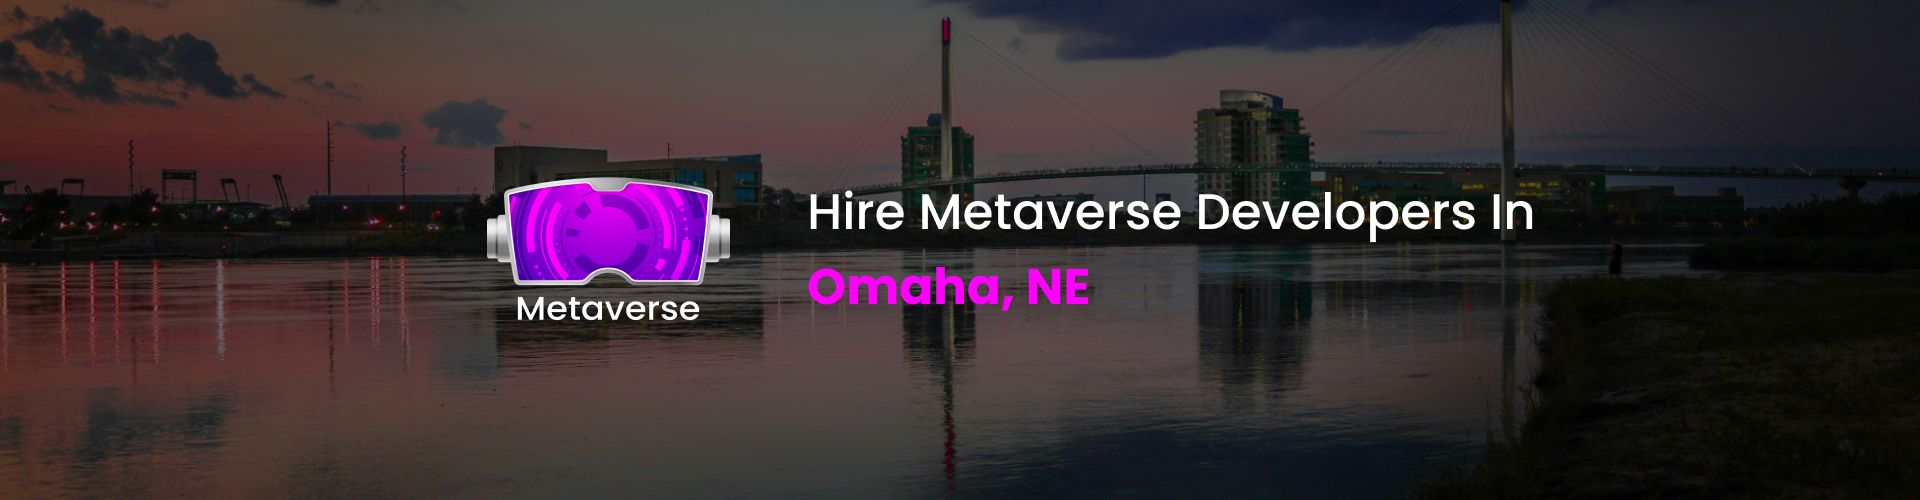 hire metaverse developers in omaha